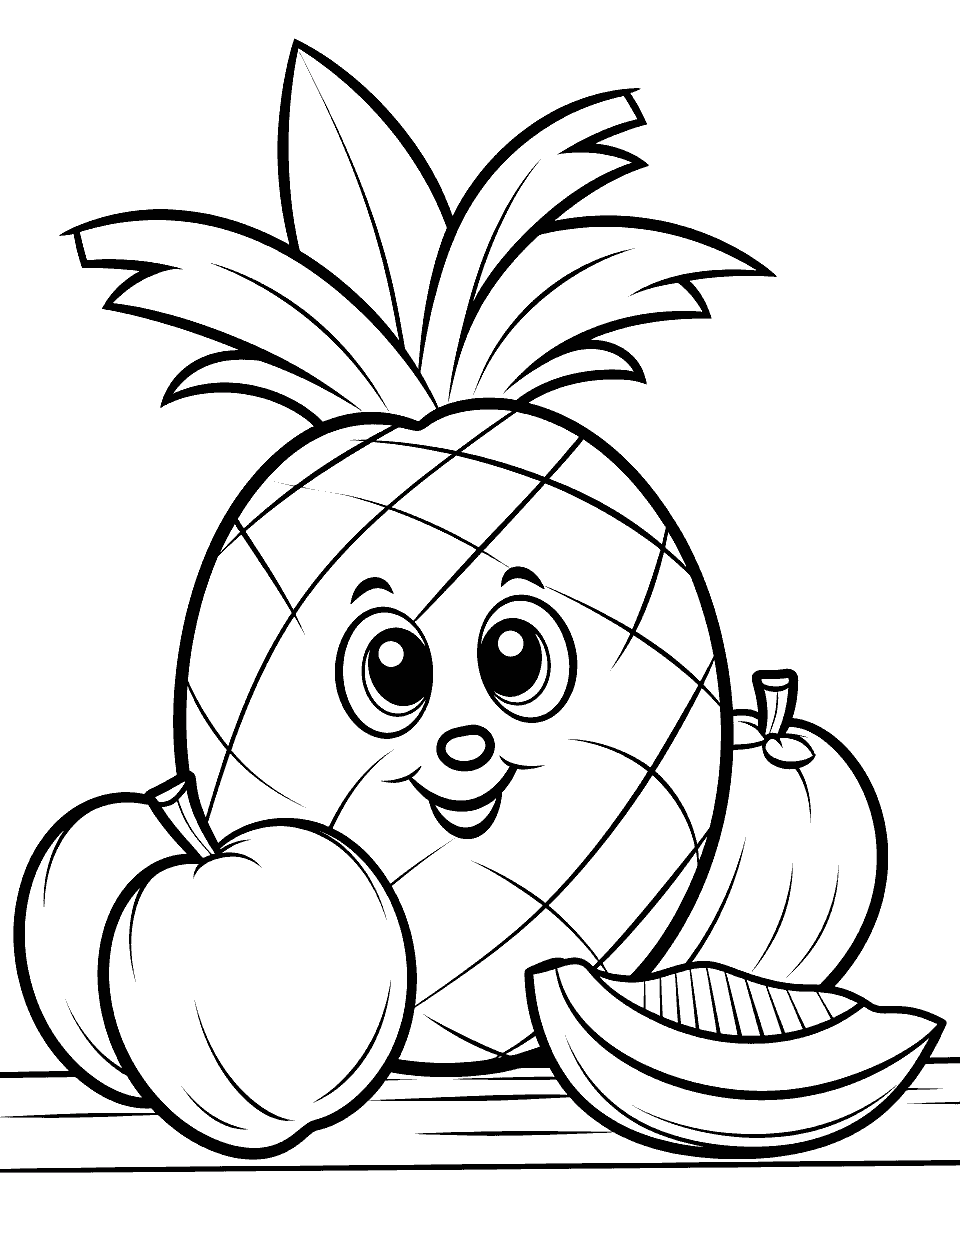 Ripe Fruits Coloring Page - Ripe fruits on a table ready to be eaten.